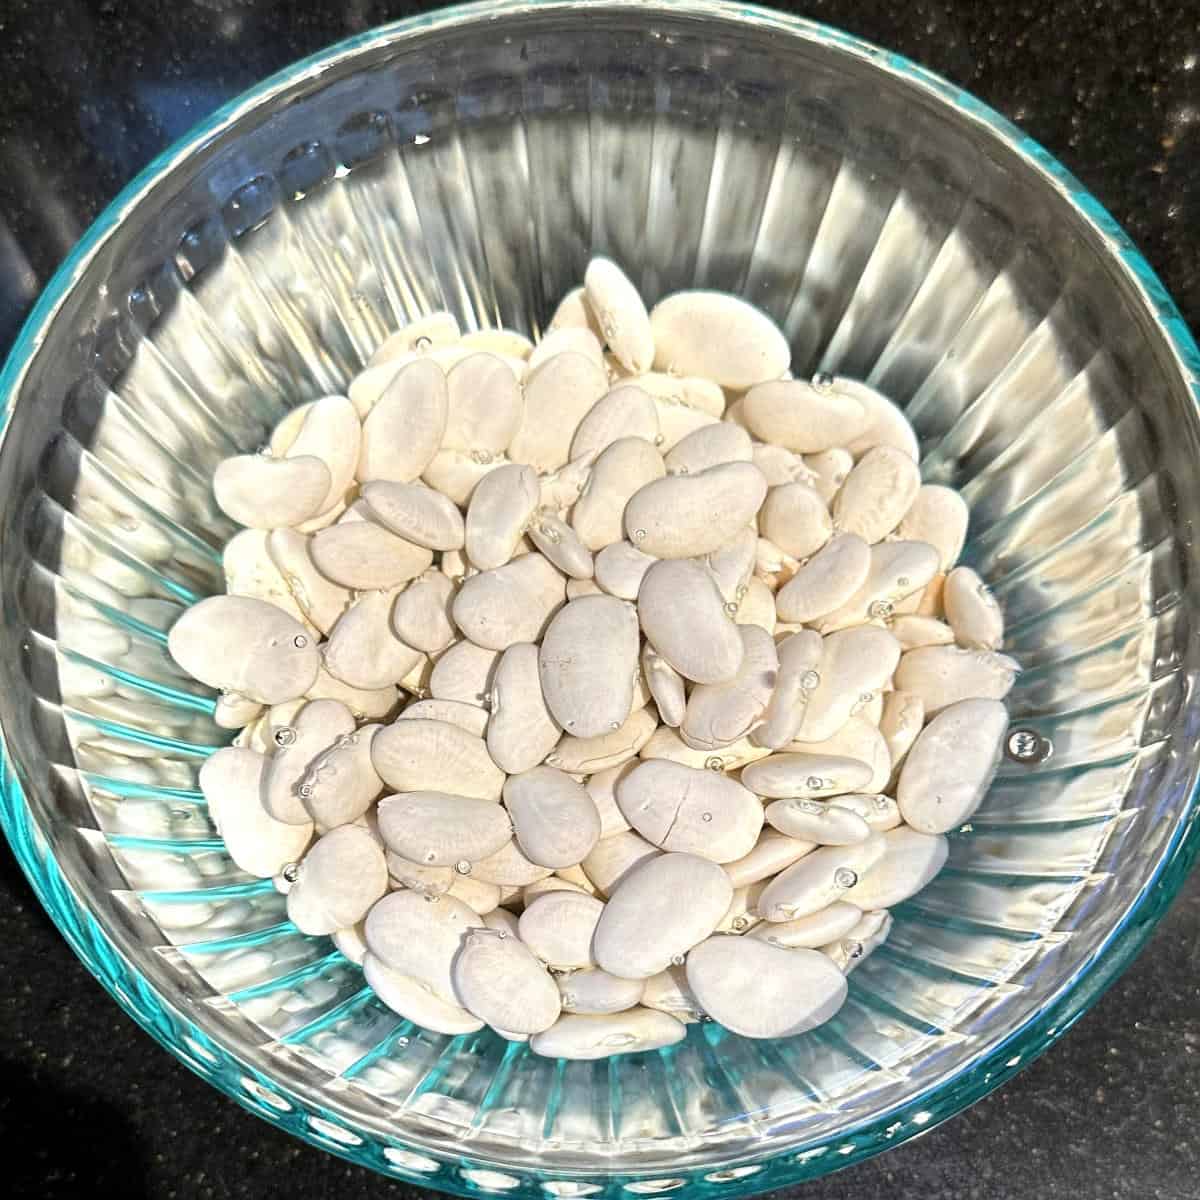 Butter beans soaked in water.